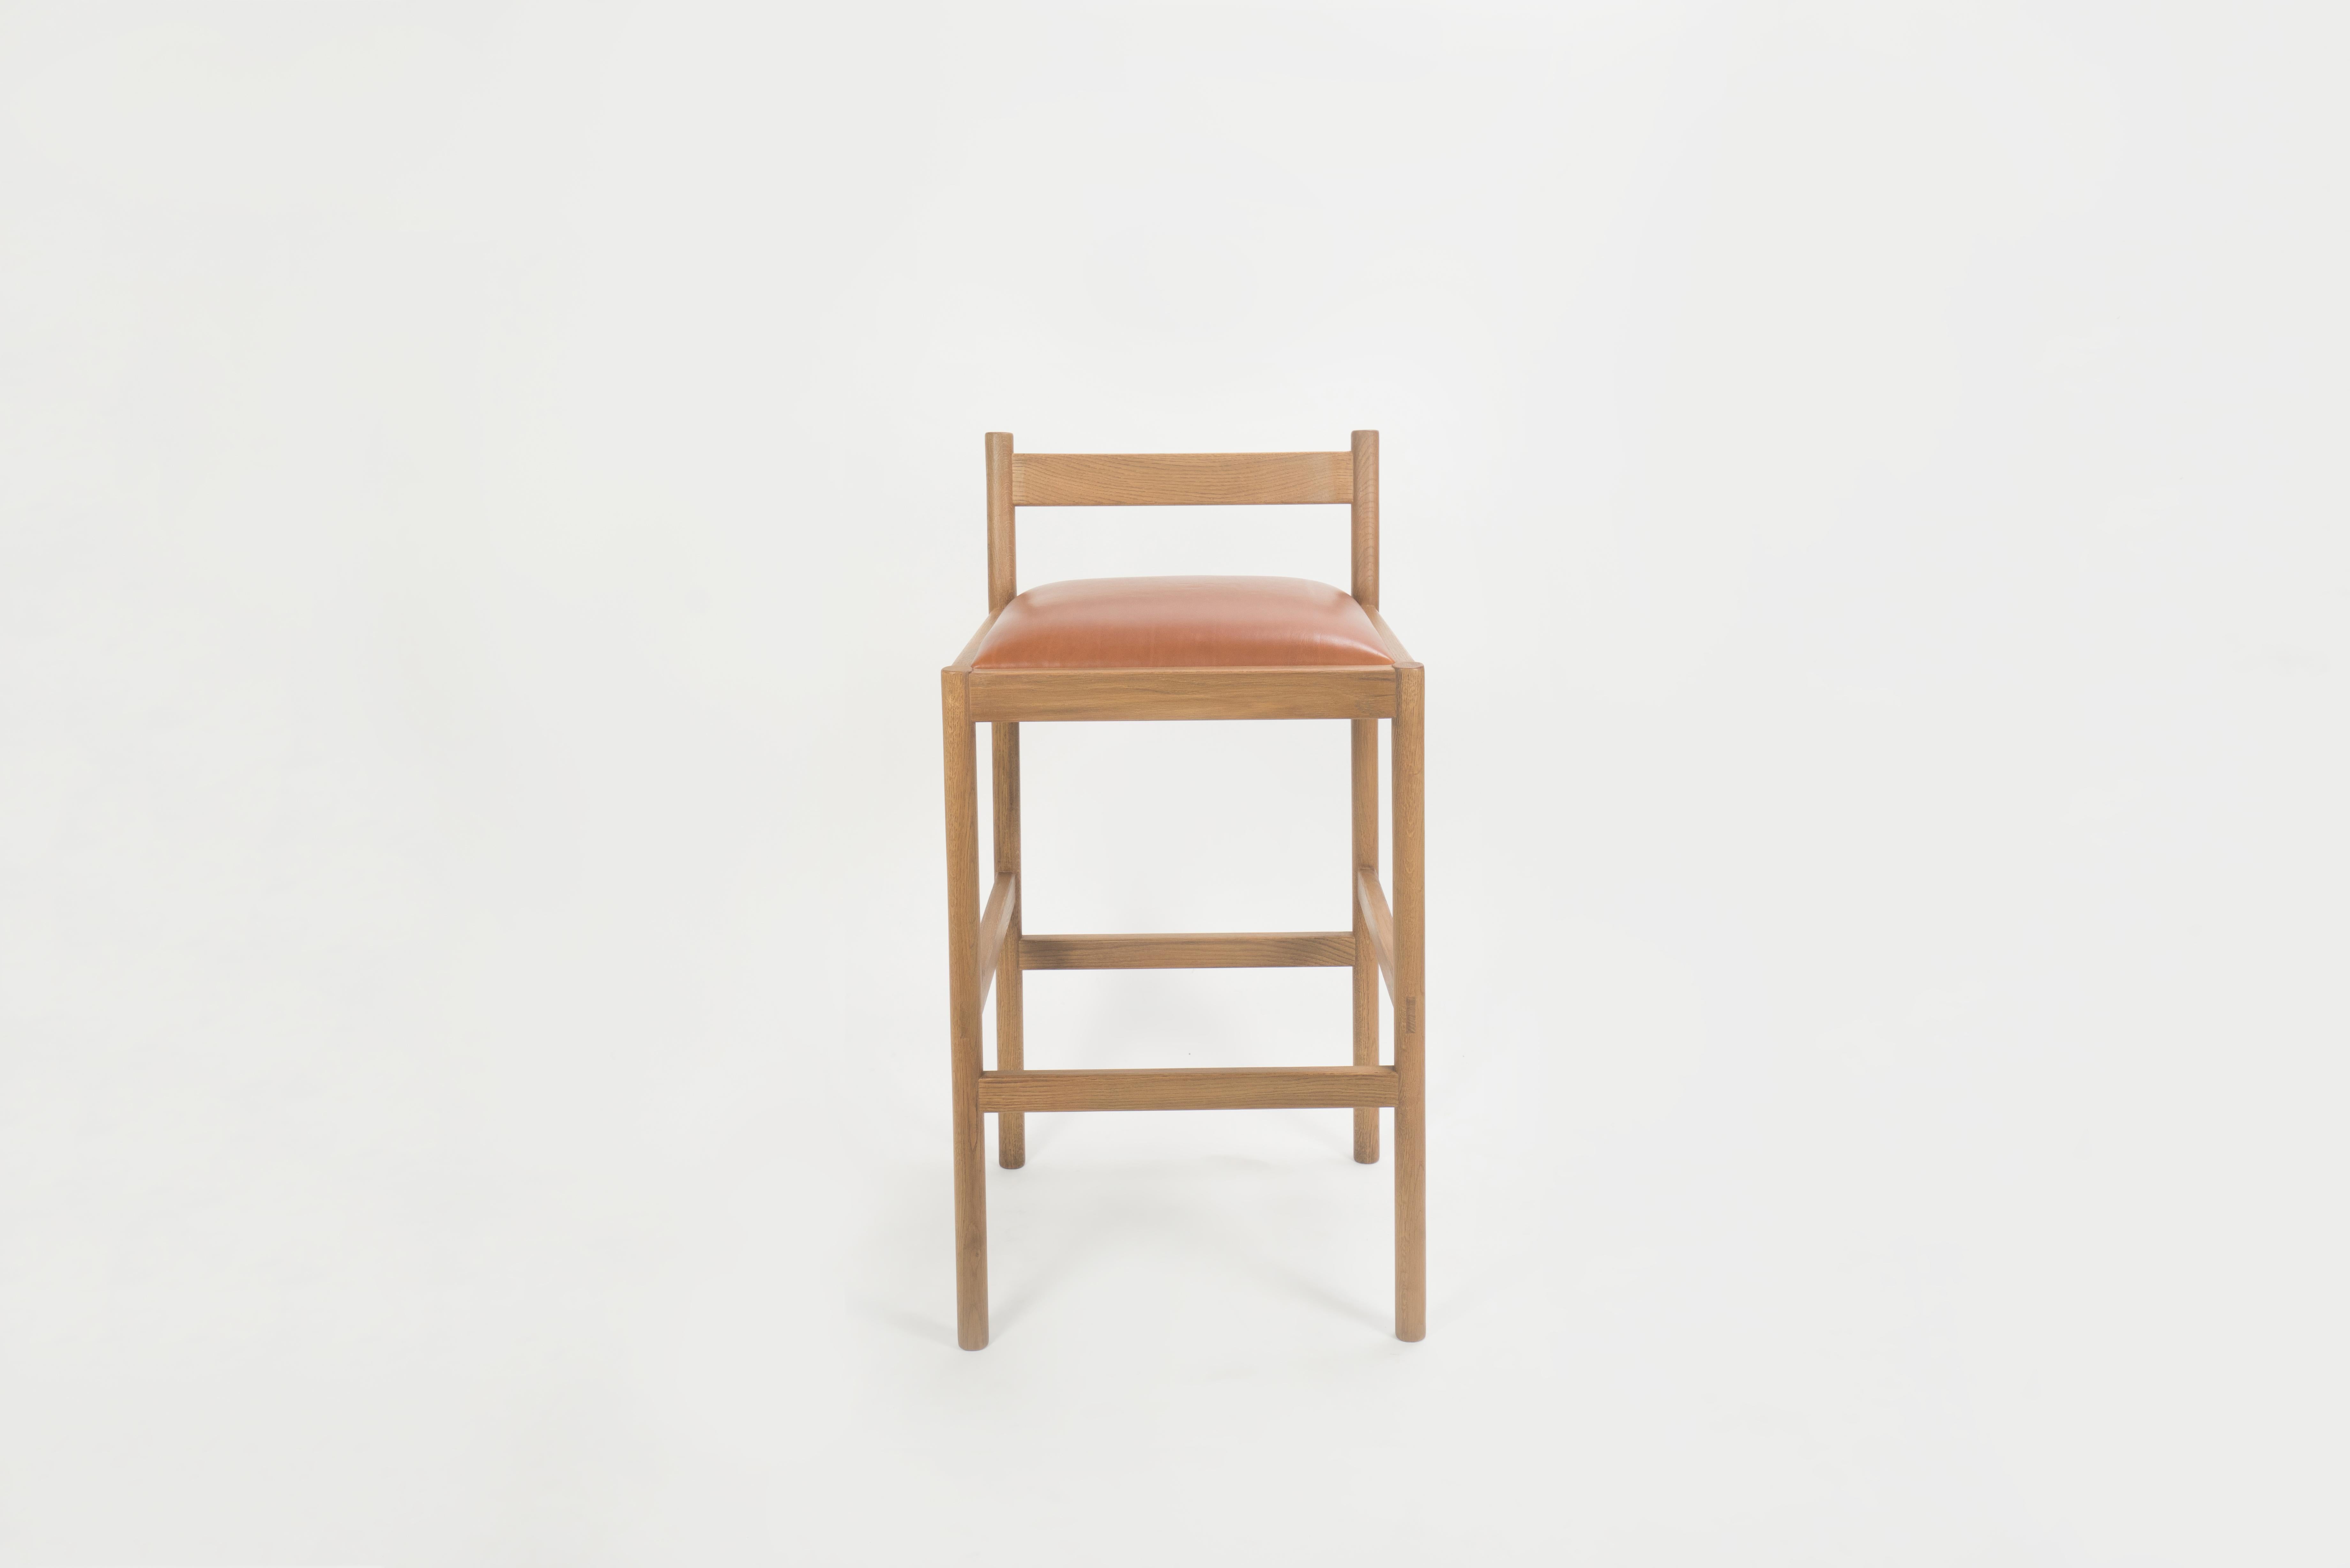 Sun at Six is a contemporary furniture design studio that works with traditional Chinese joinery masters to handcraft our pieces using traditional joinery. This minimal bar stool combines clean lines with quality material: solid white oak and